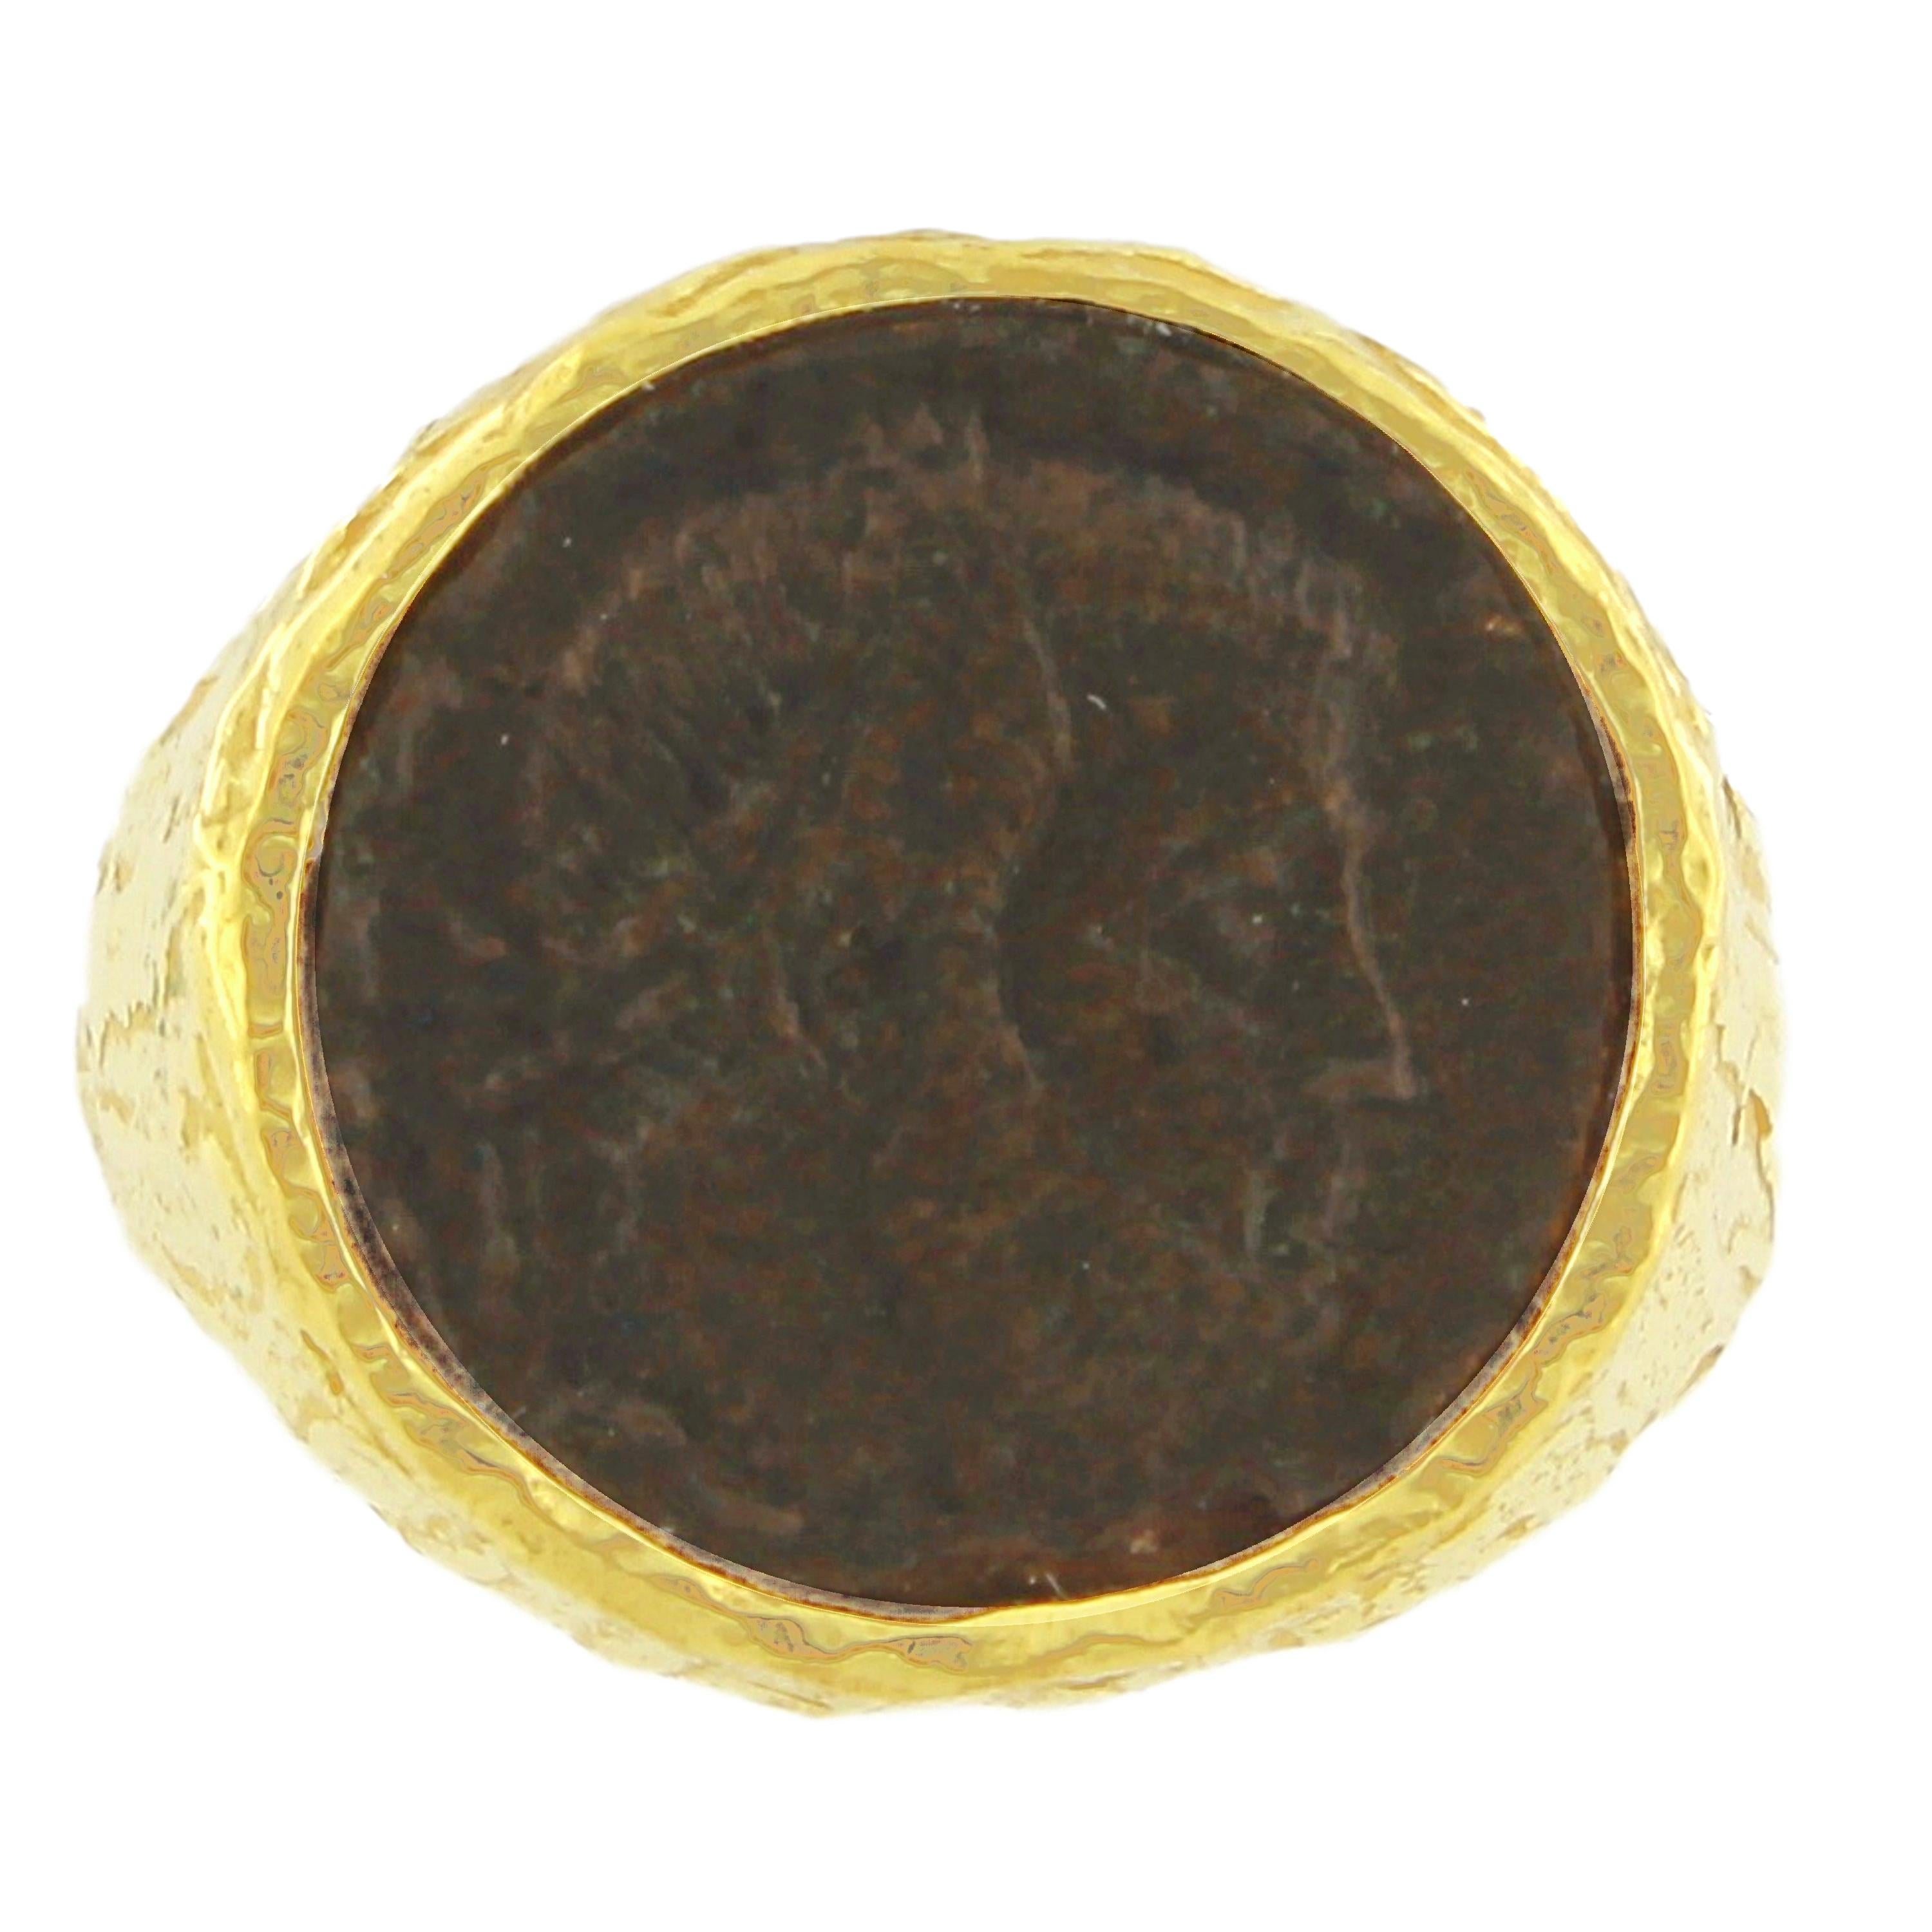 Ancient Roman Coin Band Ring in Satin Gold, from Sacchi’s 